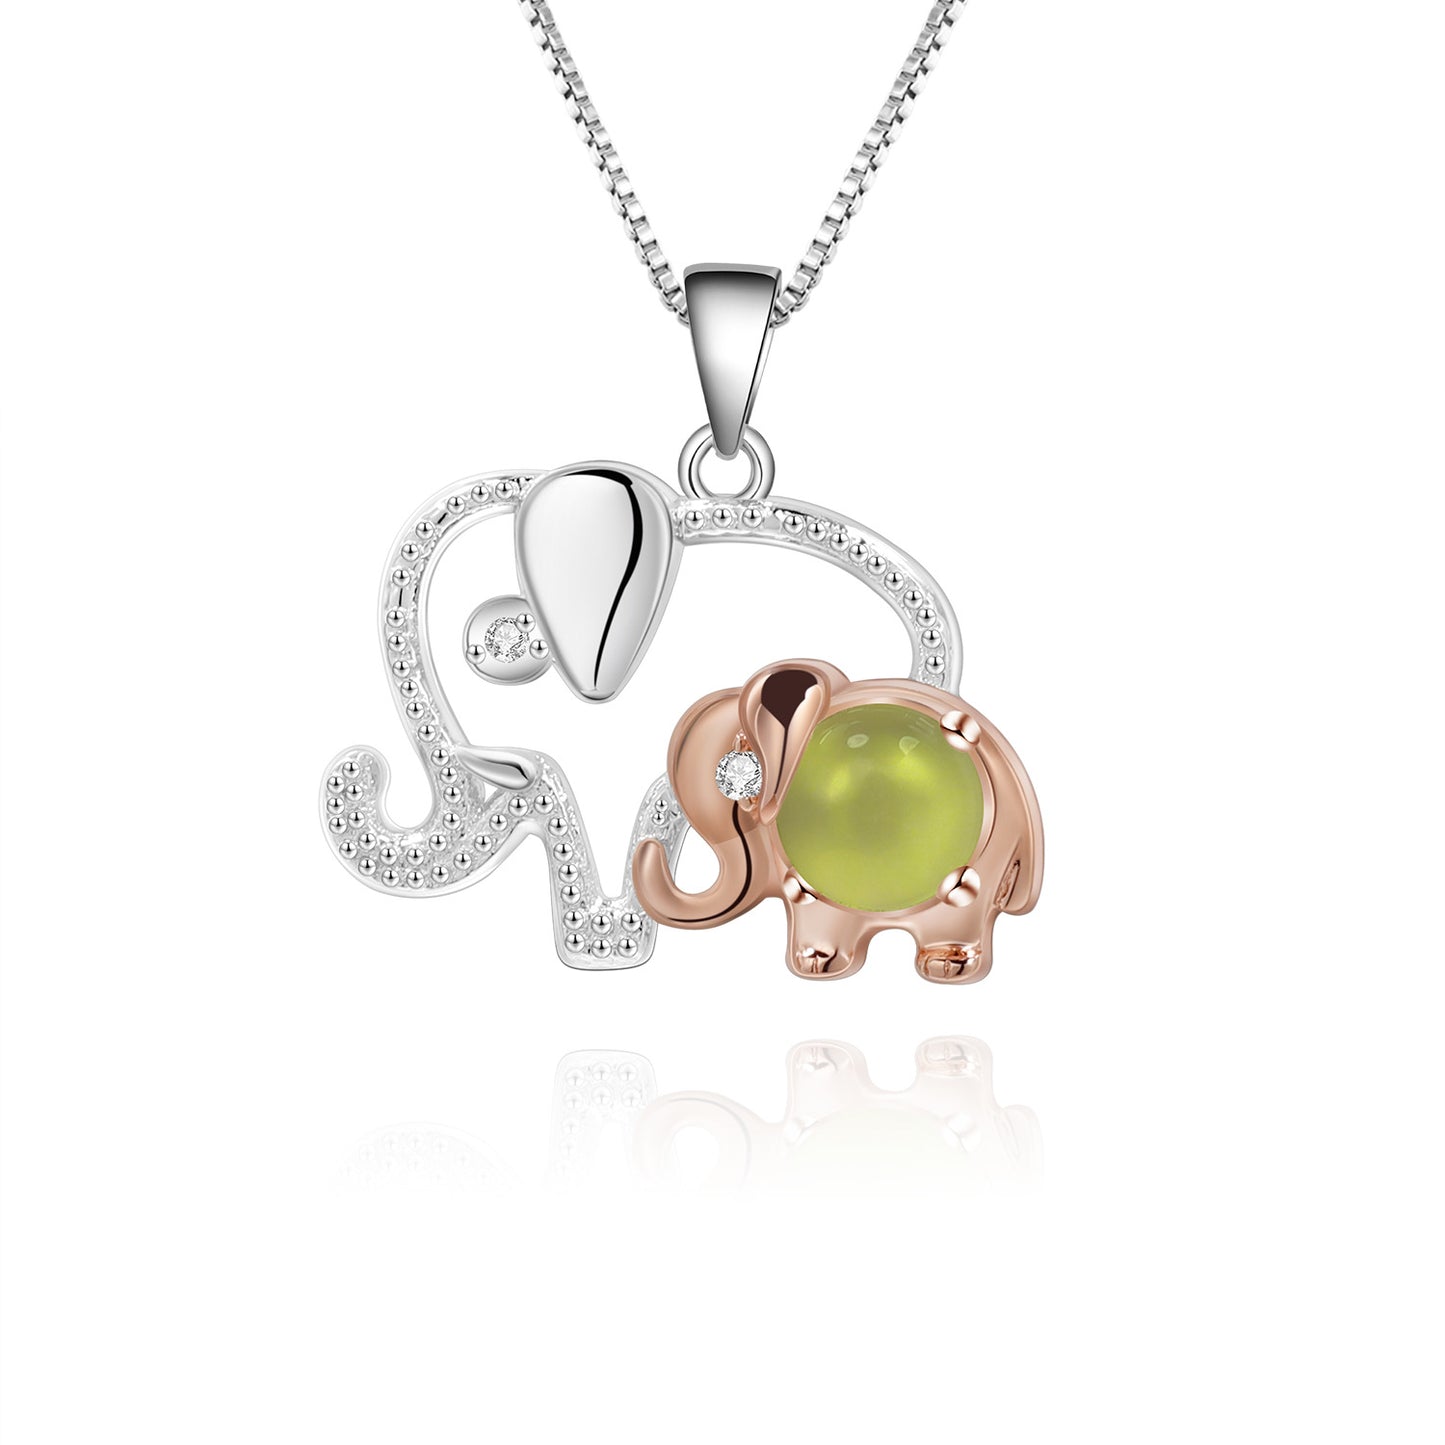 Mother's Day Gift Light Luxury Fashion Design with Colourful Gemstone Mother and Baby Elephant Pendant Sterling Silver Necklace for Women